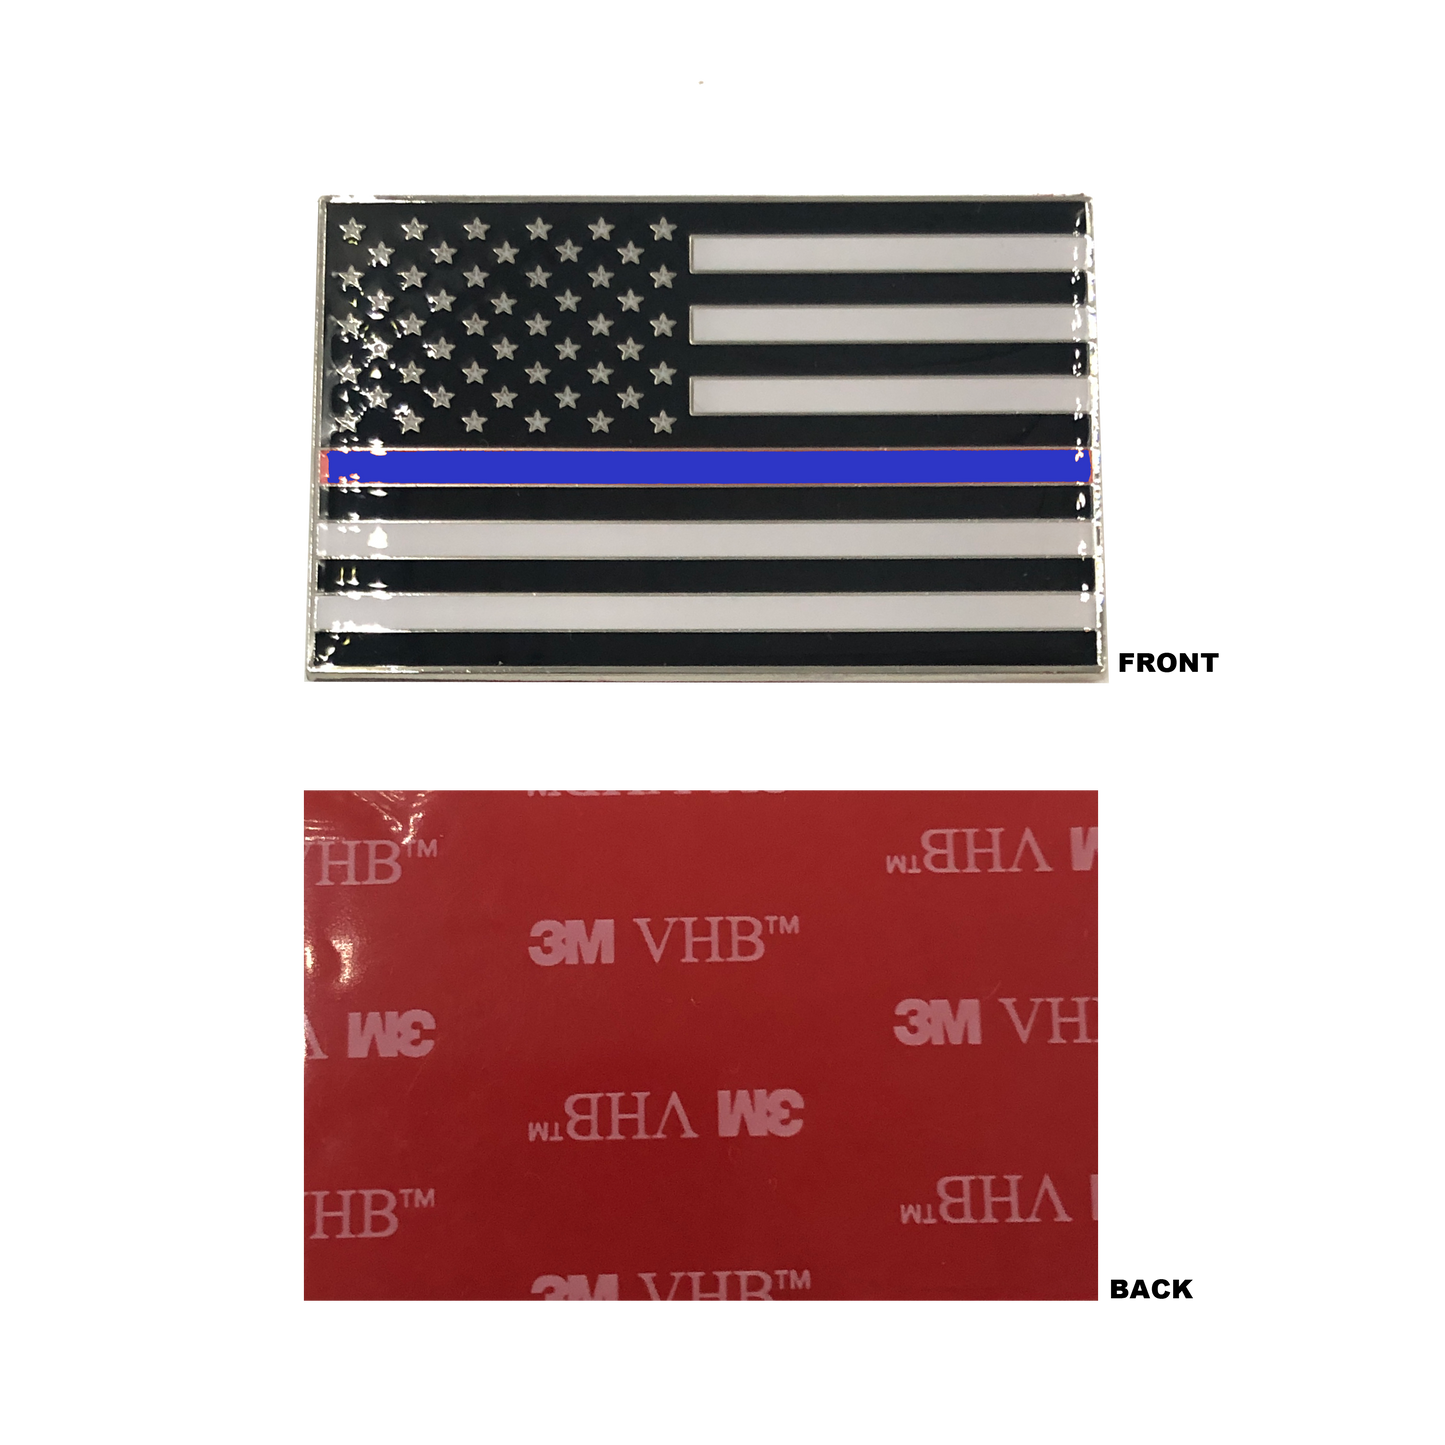 DL9-03 Thin Blue Line US Flag Vehicle Emblem high-end metal decal with 3M VHB Tape Police CBP LEO